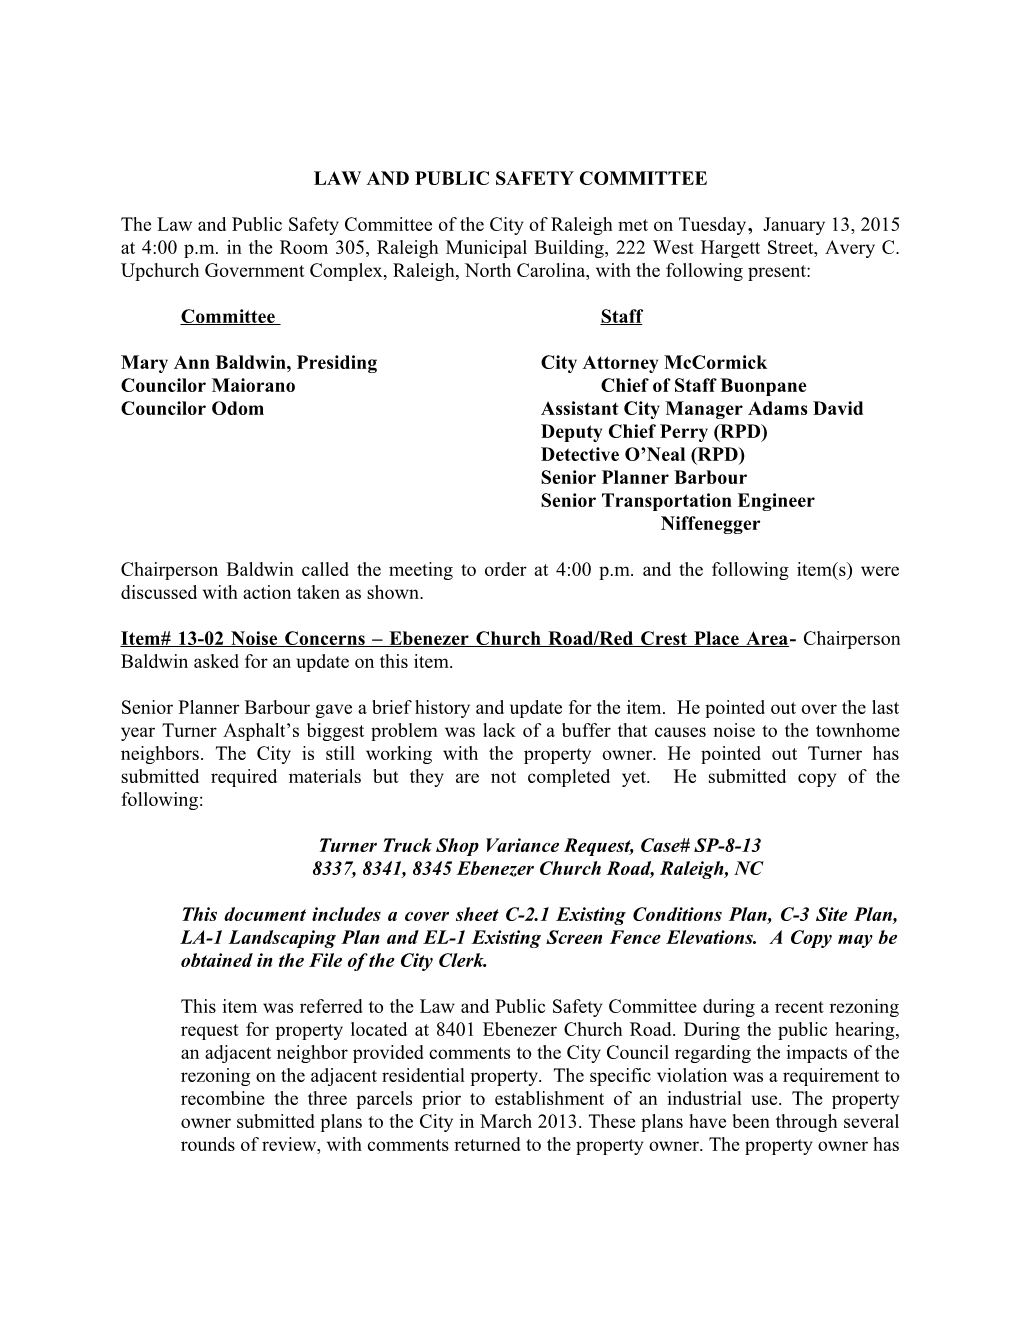 Law and Public Safety Committee Minutes - 01/13/2015